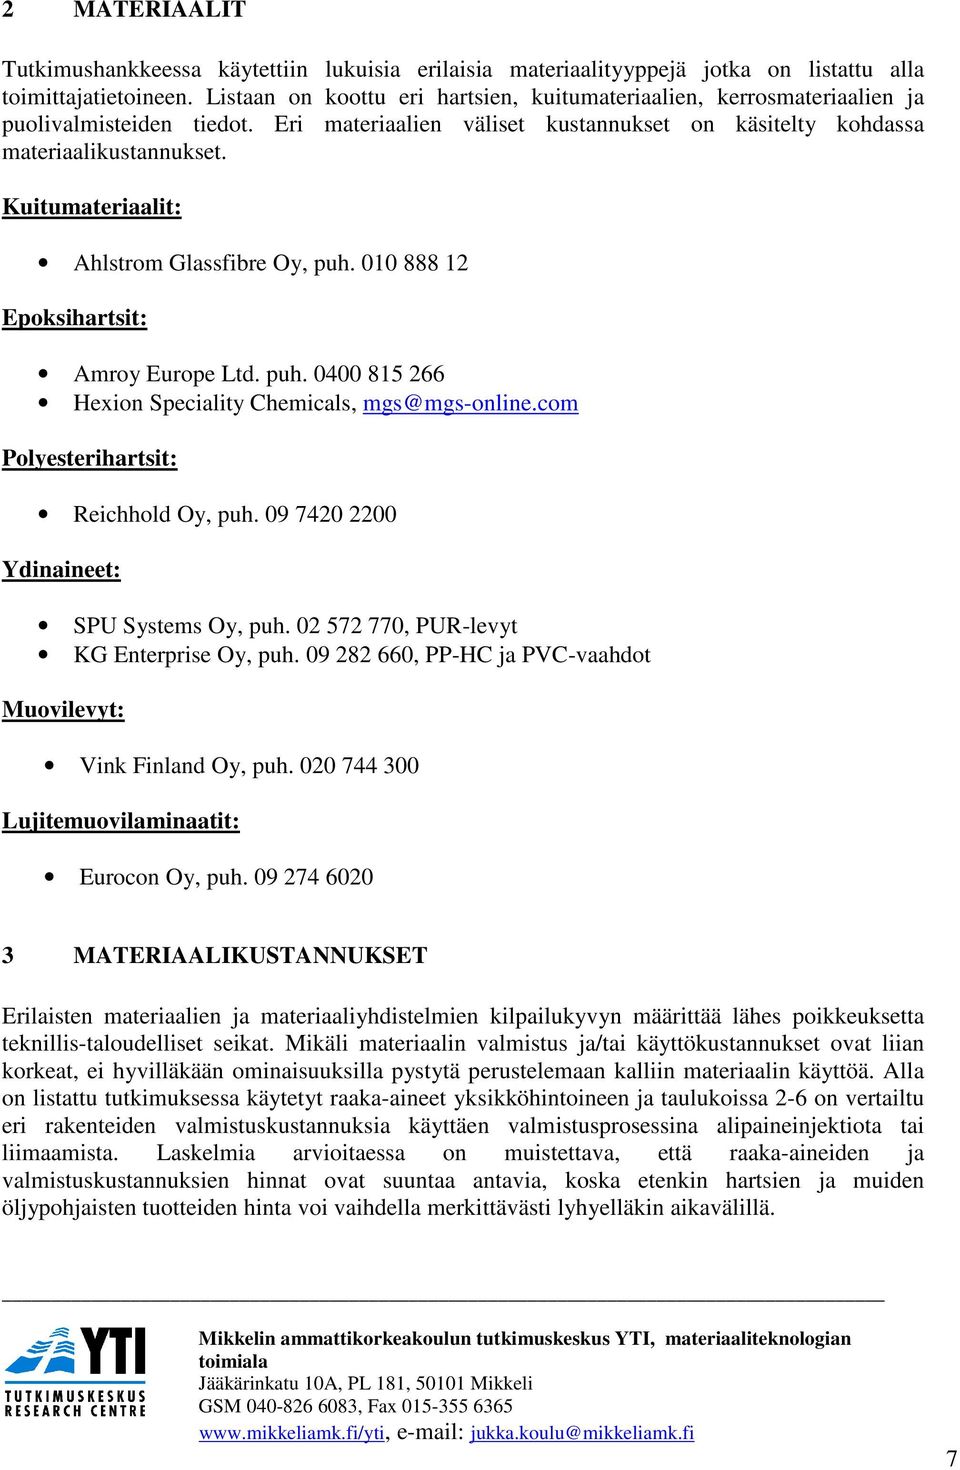 Kuitumateriaalit: Ahlstrom Glassfibre Oy, puh. 010 888 12 Epoksihartsit: Amroy Europe Ltd. puh. 0400 815 266 Hexion Speciality Chemicals, mgs@mgs-online.com Polyesterihartsit: Reichhold Oy, puh.